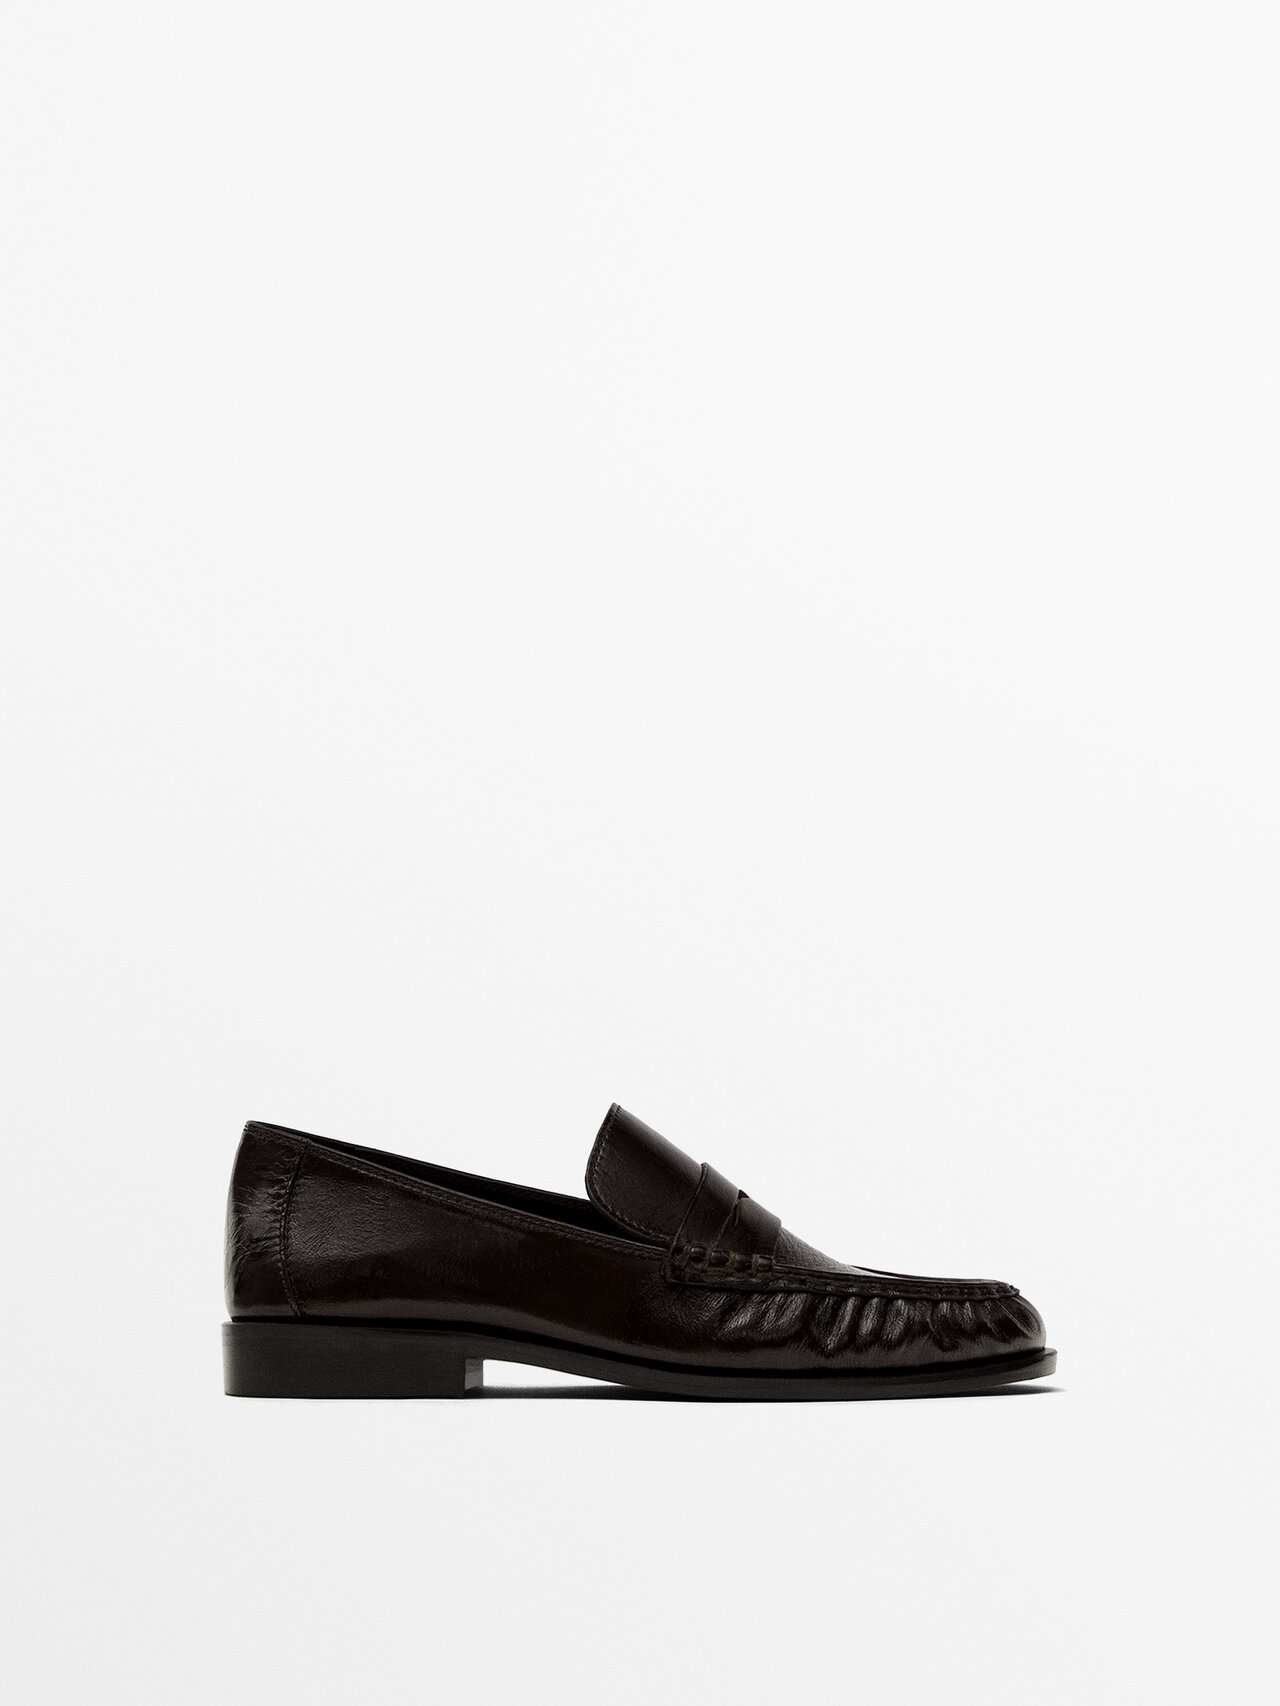 Massimo Dutti Gathered Penny Loafers In Brown